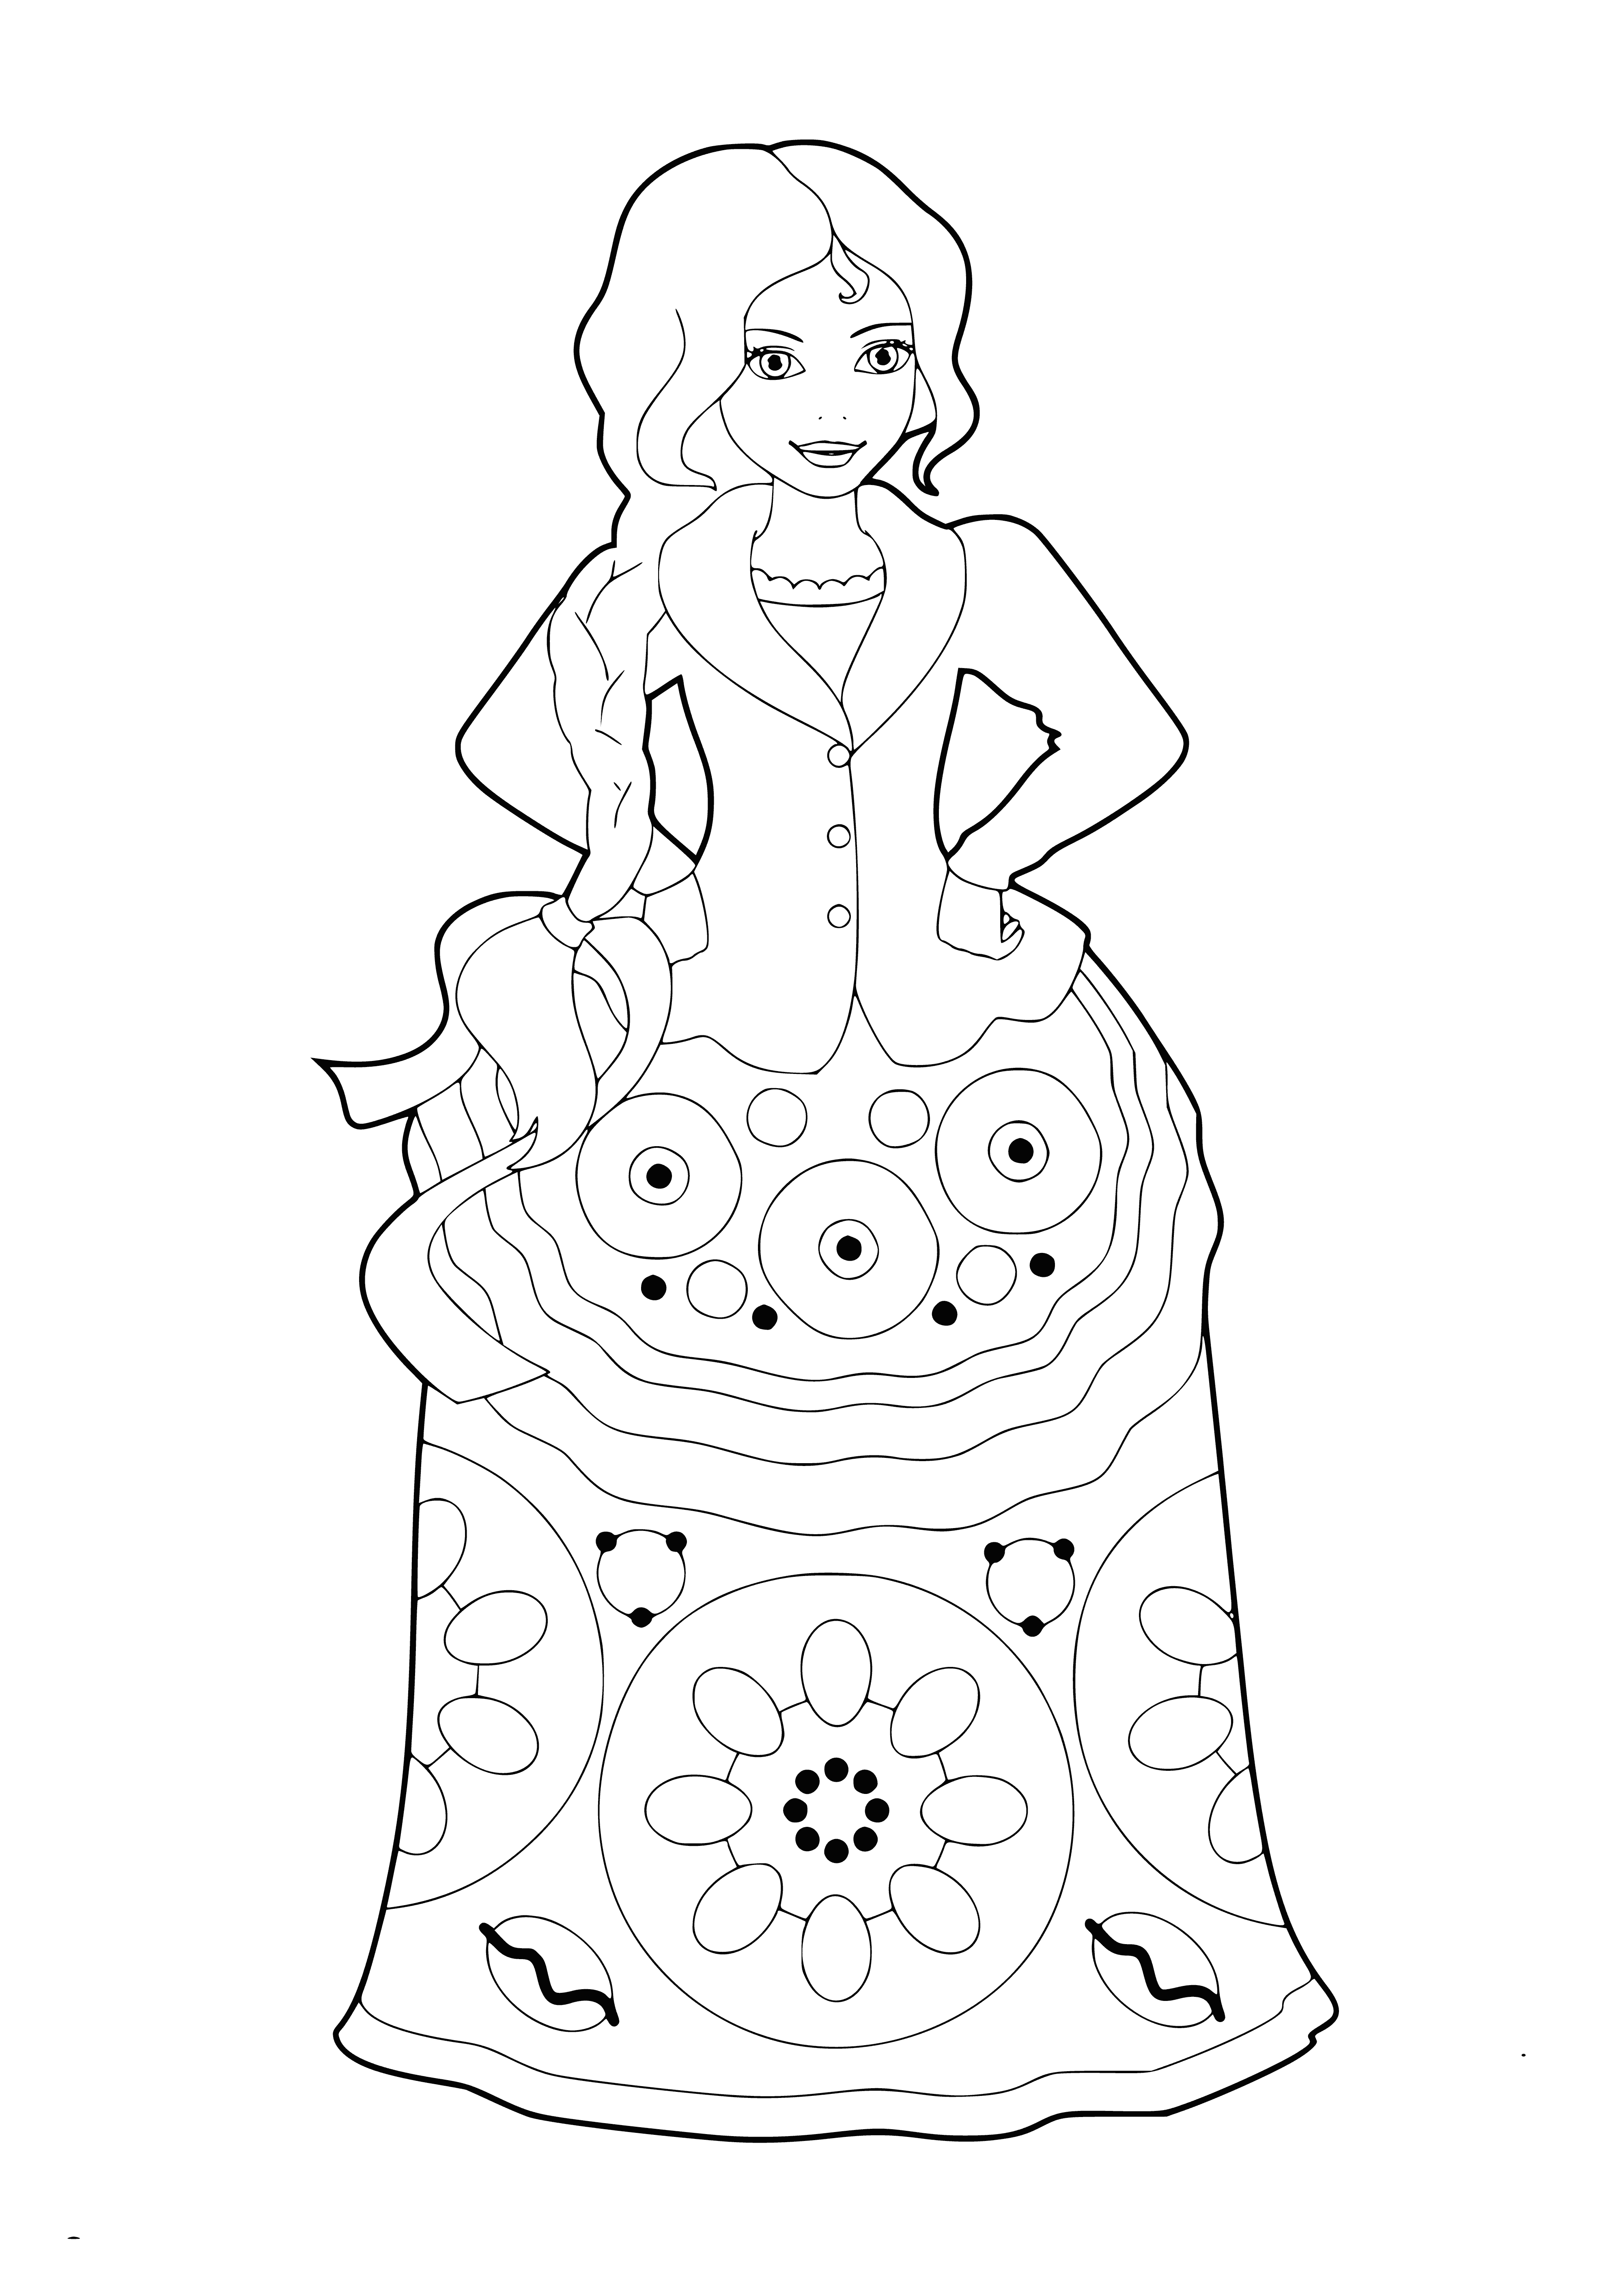 Dymkovo young lady coloring page